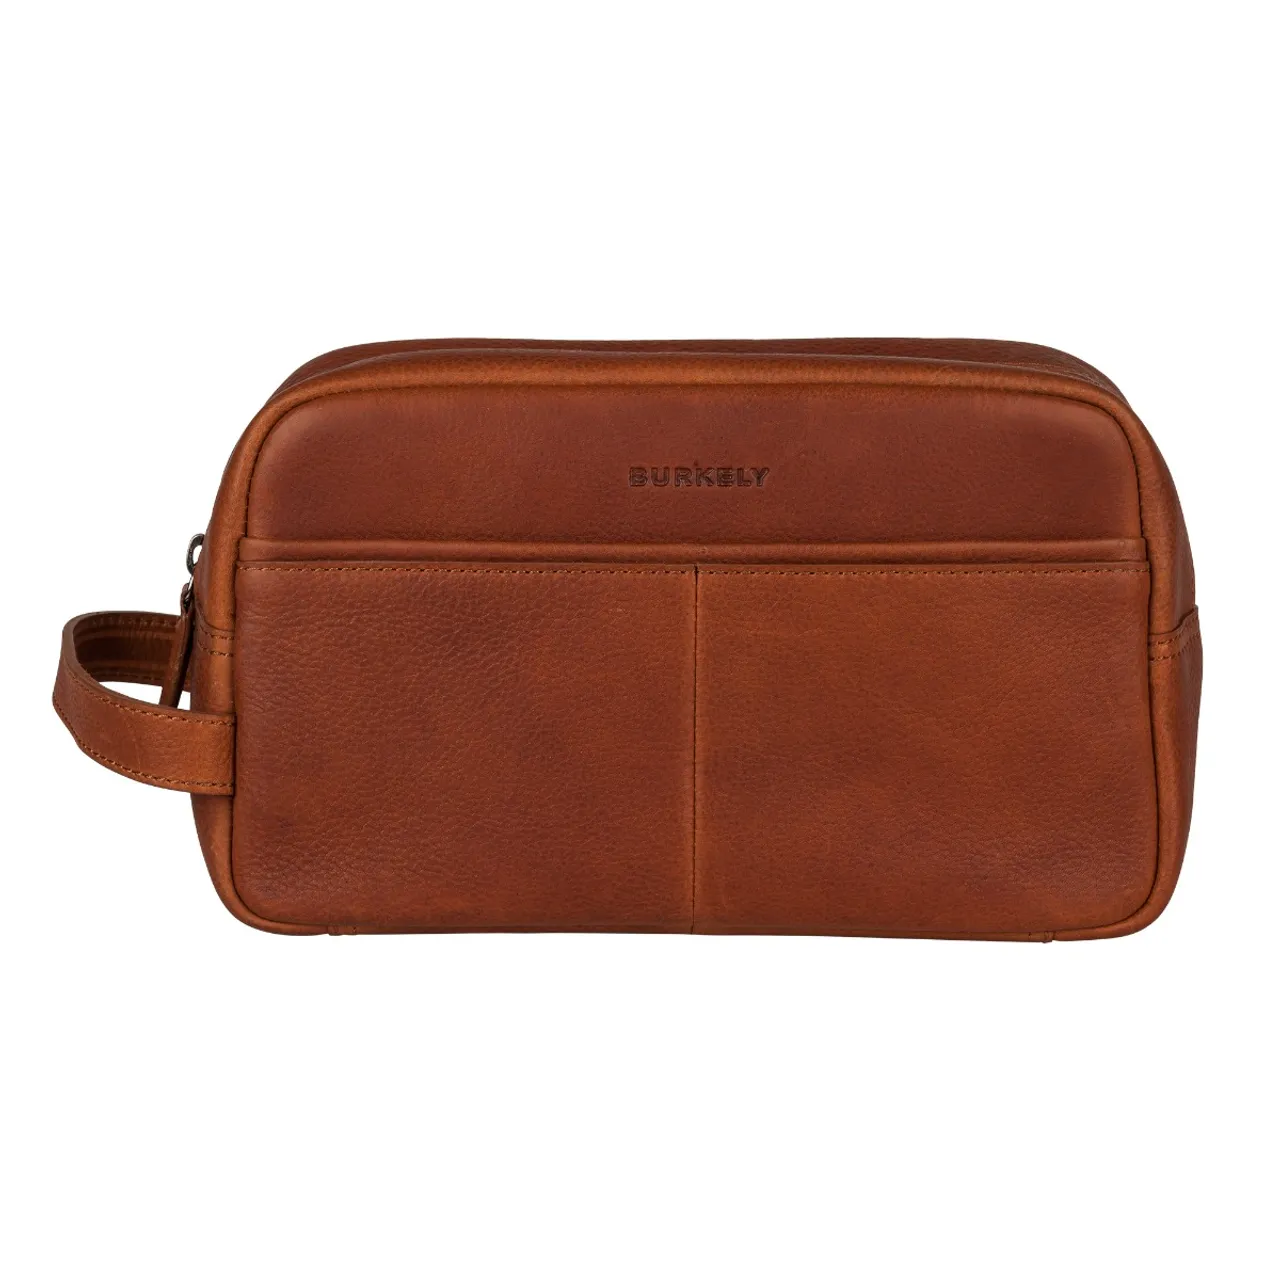 Burkely Antique Avery Toiletry Bag-Cognac